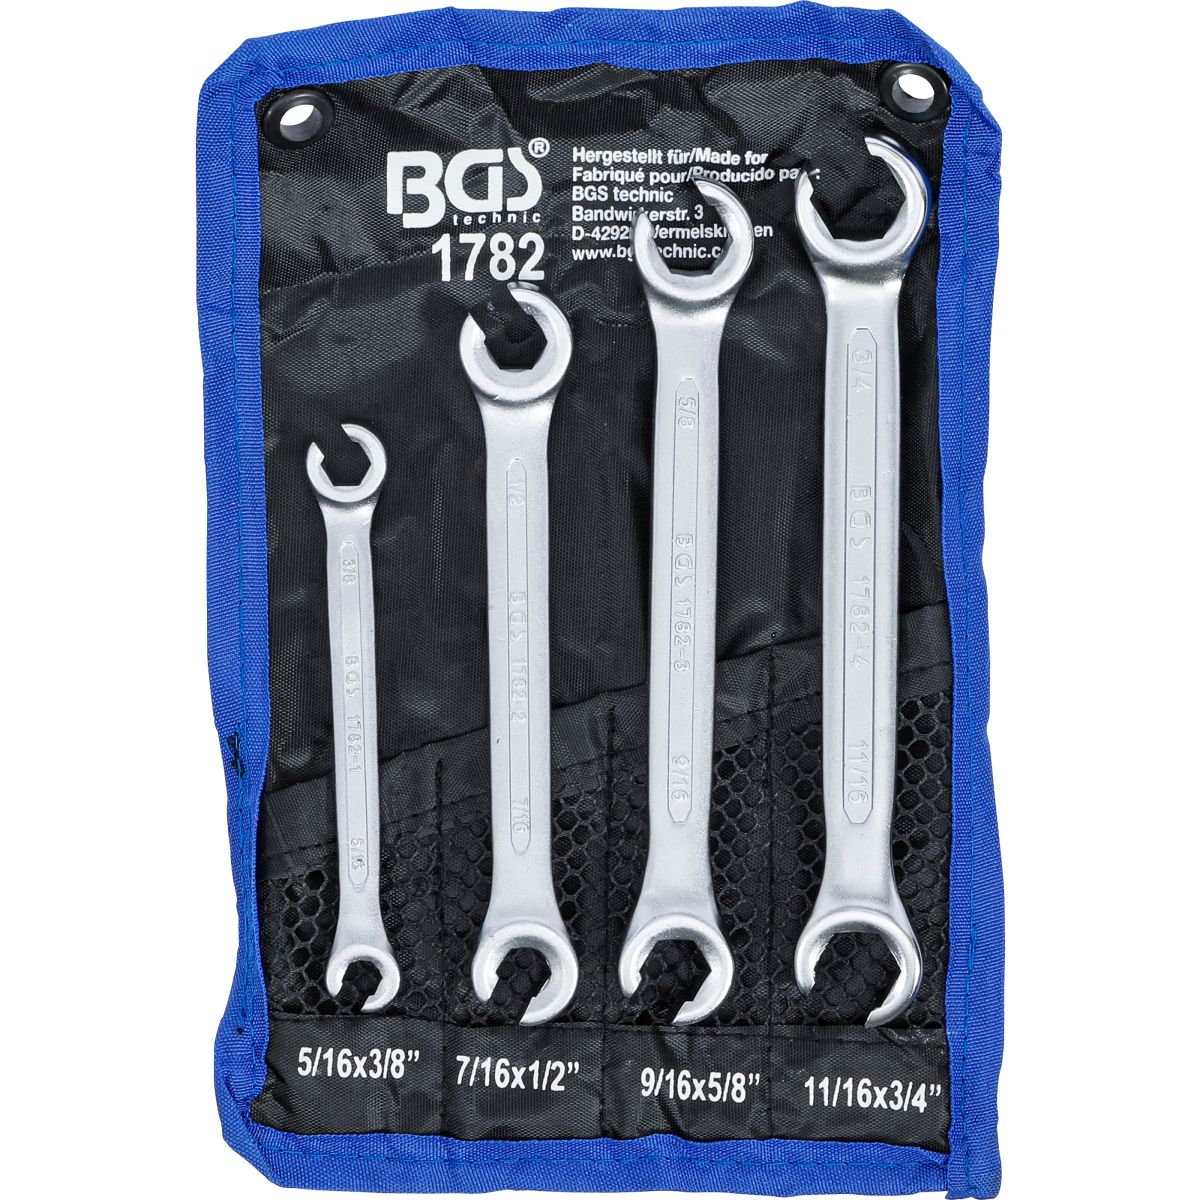 Double Ring Spanner Set, open Type | Inch Sizes | 4 pcs.